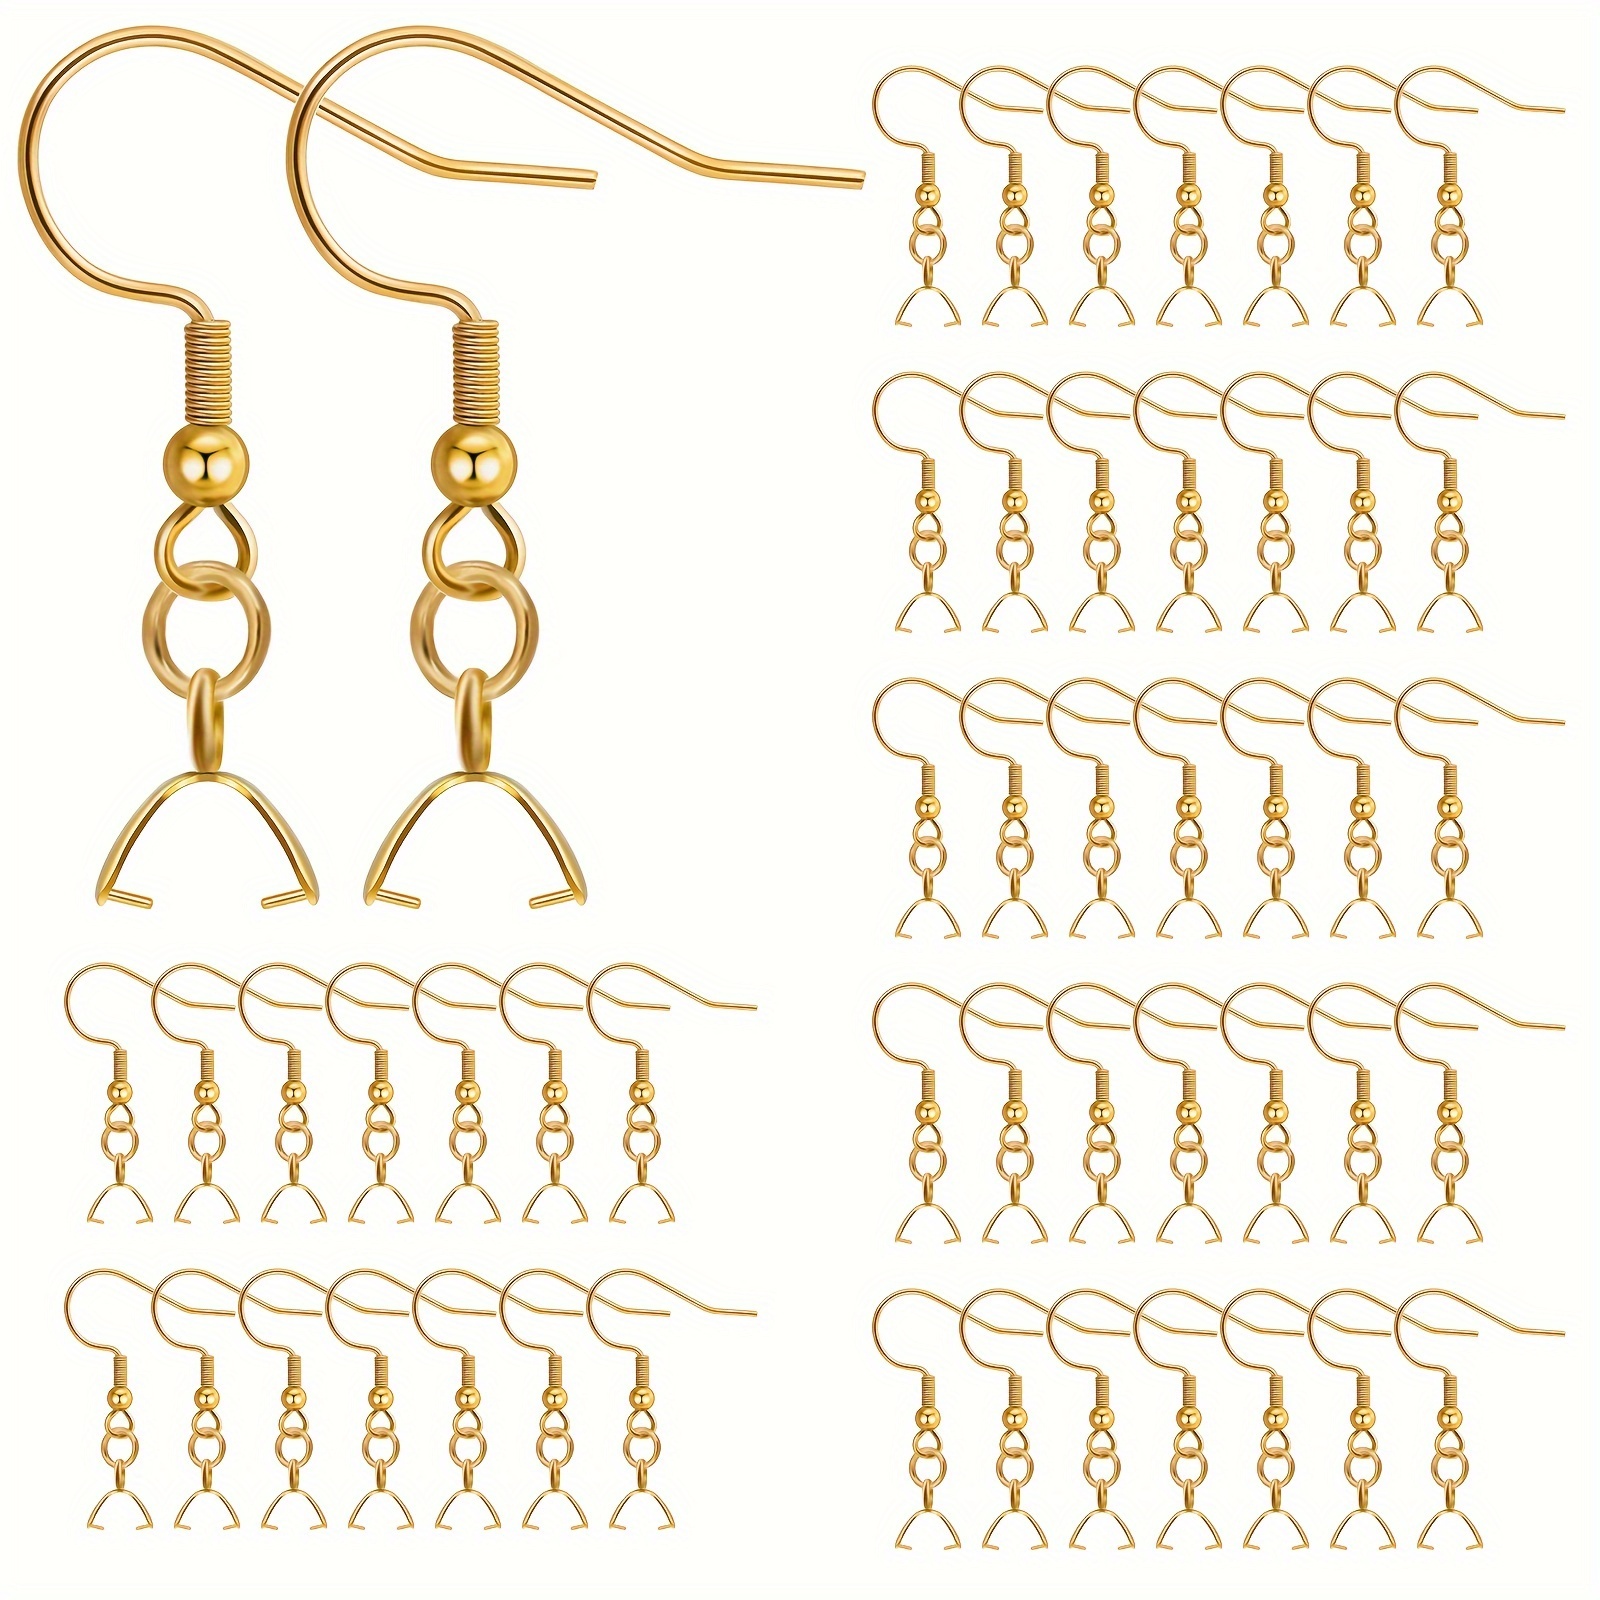 

20pcs Earring Hooks, Ear Wires Fish Hooks With Pendant Clasp, Hypo-allergenic Jewelry Findings Parts For Diy Jewelry Making Earring Supplies, Golden Diy